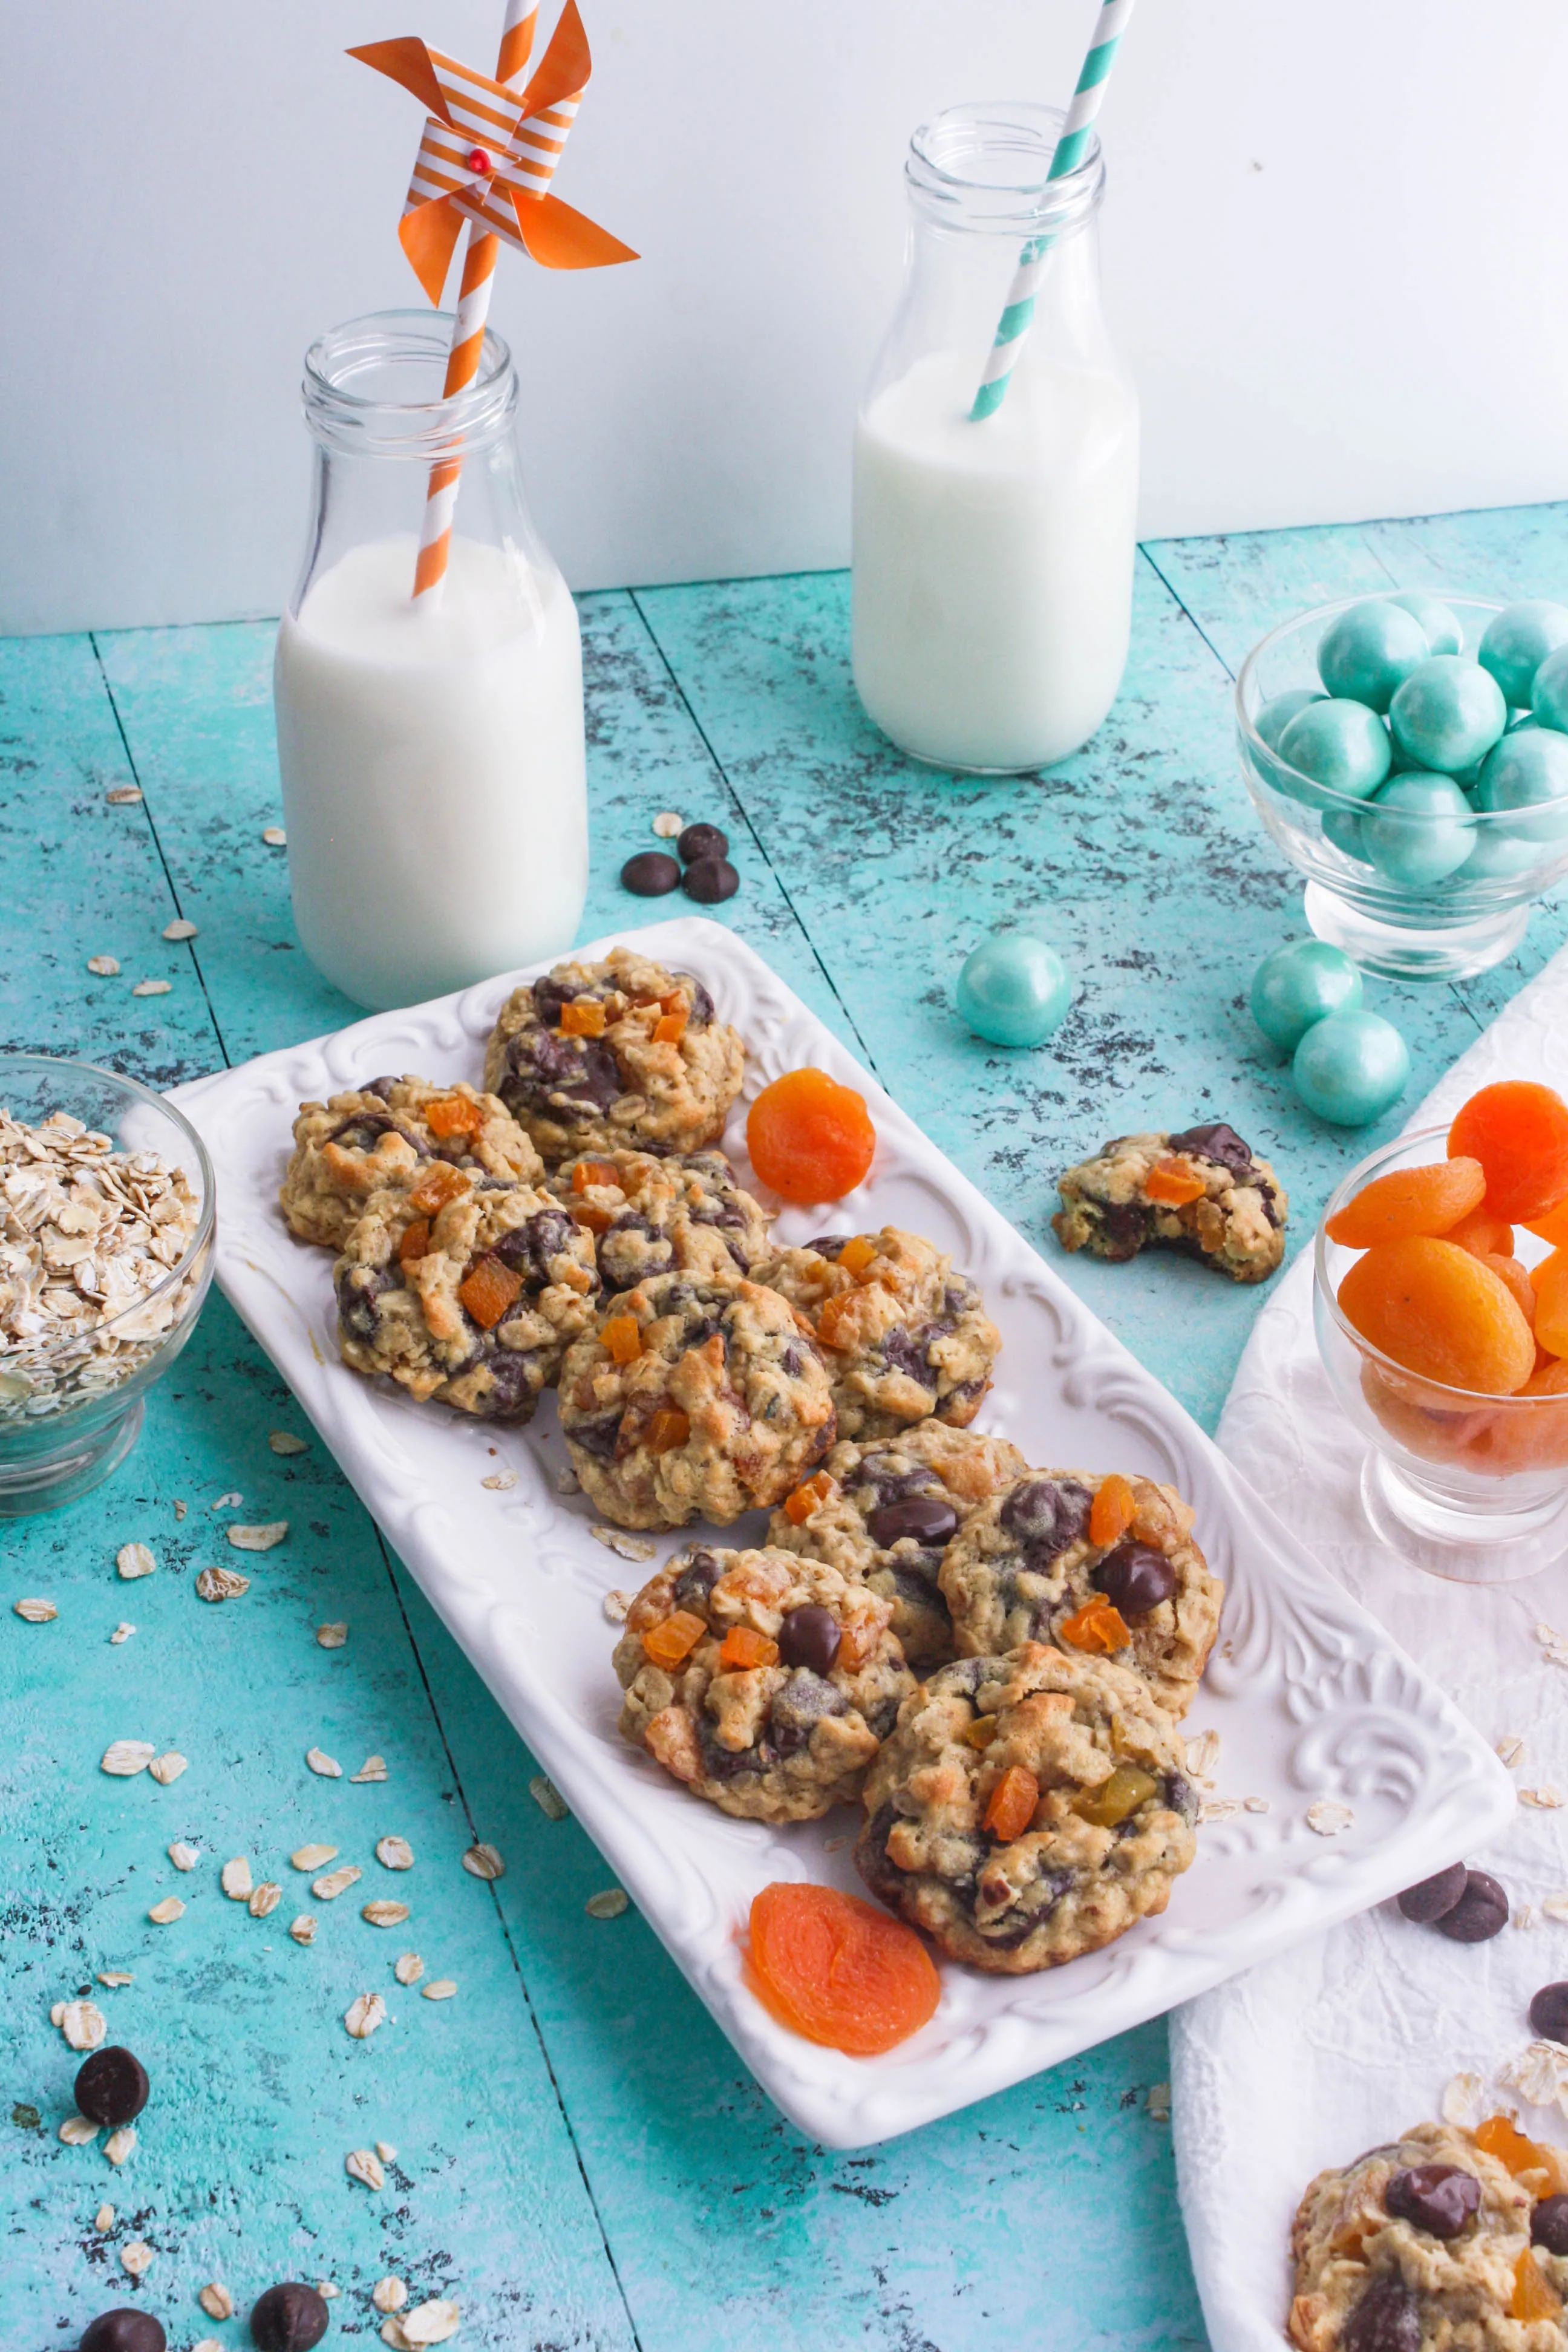 Dark Chocolate Apricot Oatmeal Cookies are great paired with a glass of milk! You'll enjoy Dark Chocolate Apricot Oatmeal Cookies with milk, coffee, or anything, really!